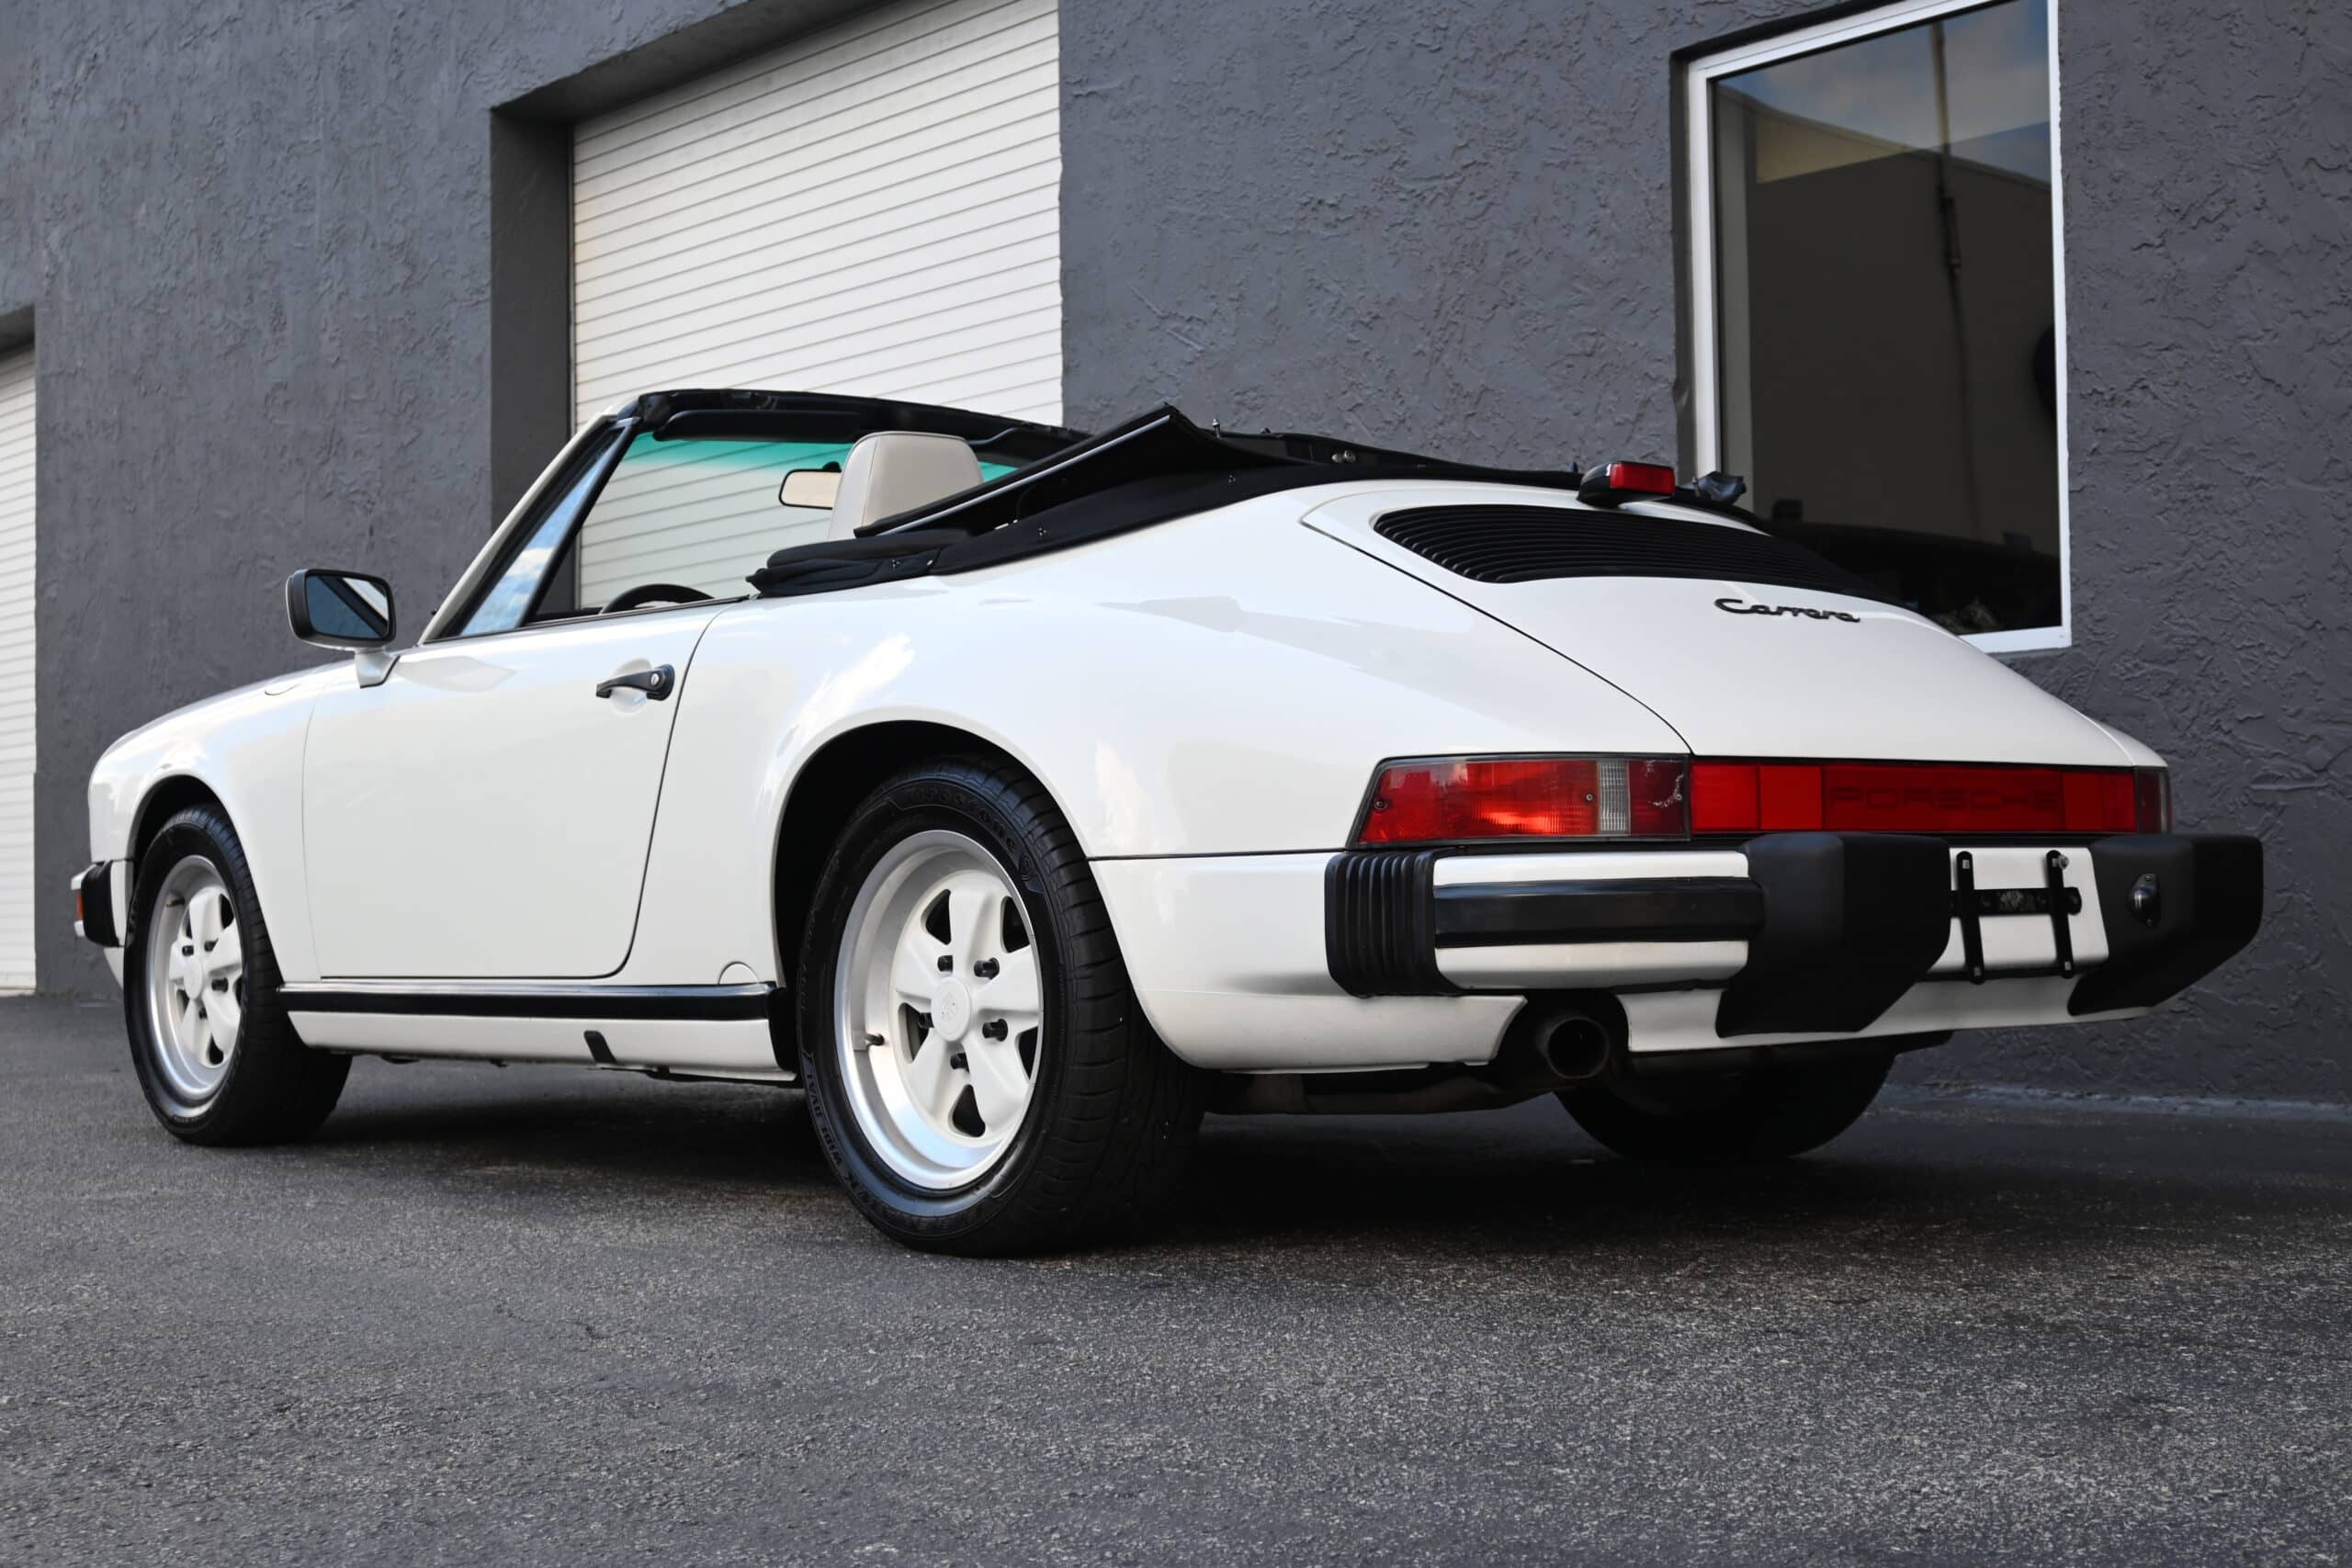 1988 Carrera Cabrio,G50, low miles with recent service at marque specialist, Iconic 1980’s color combo, outstanding condition, tools.